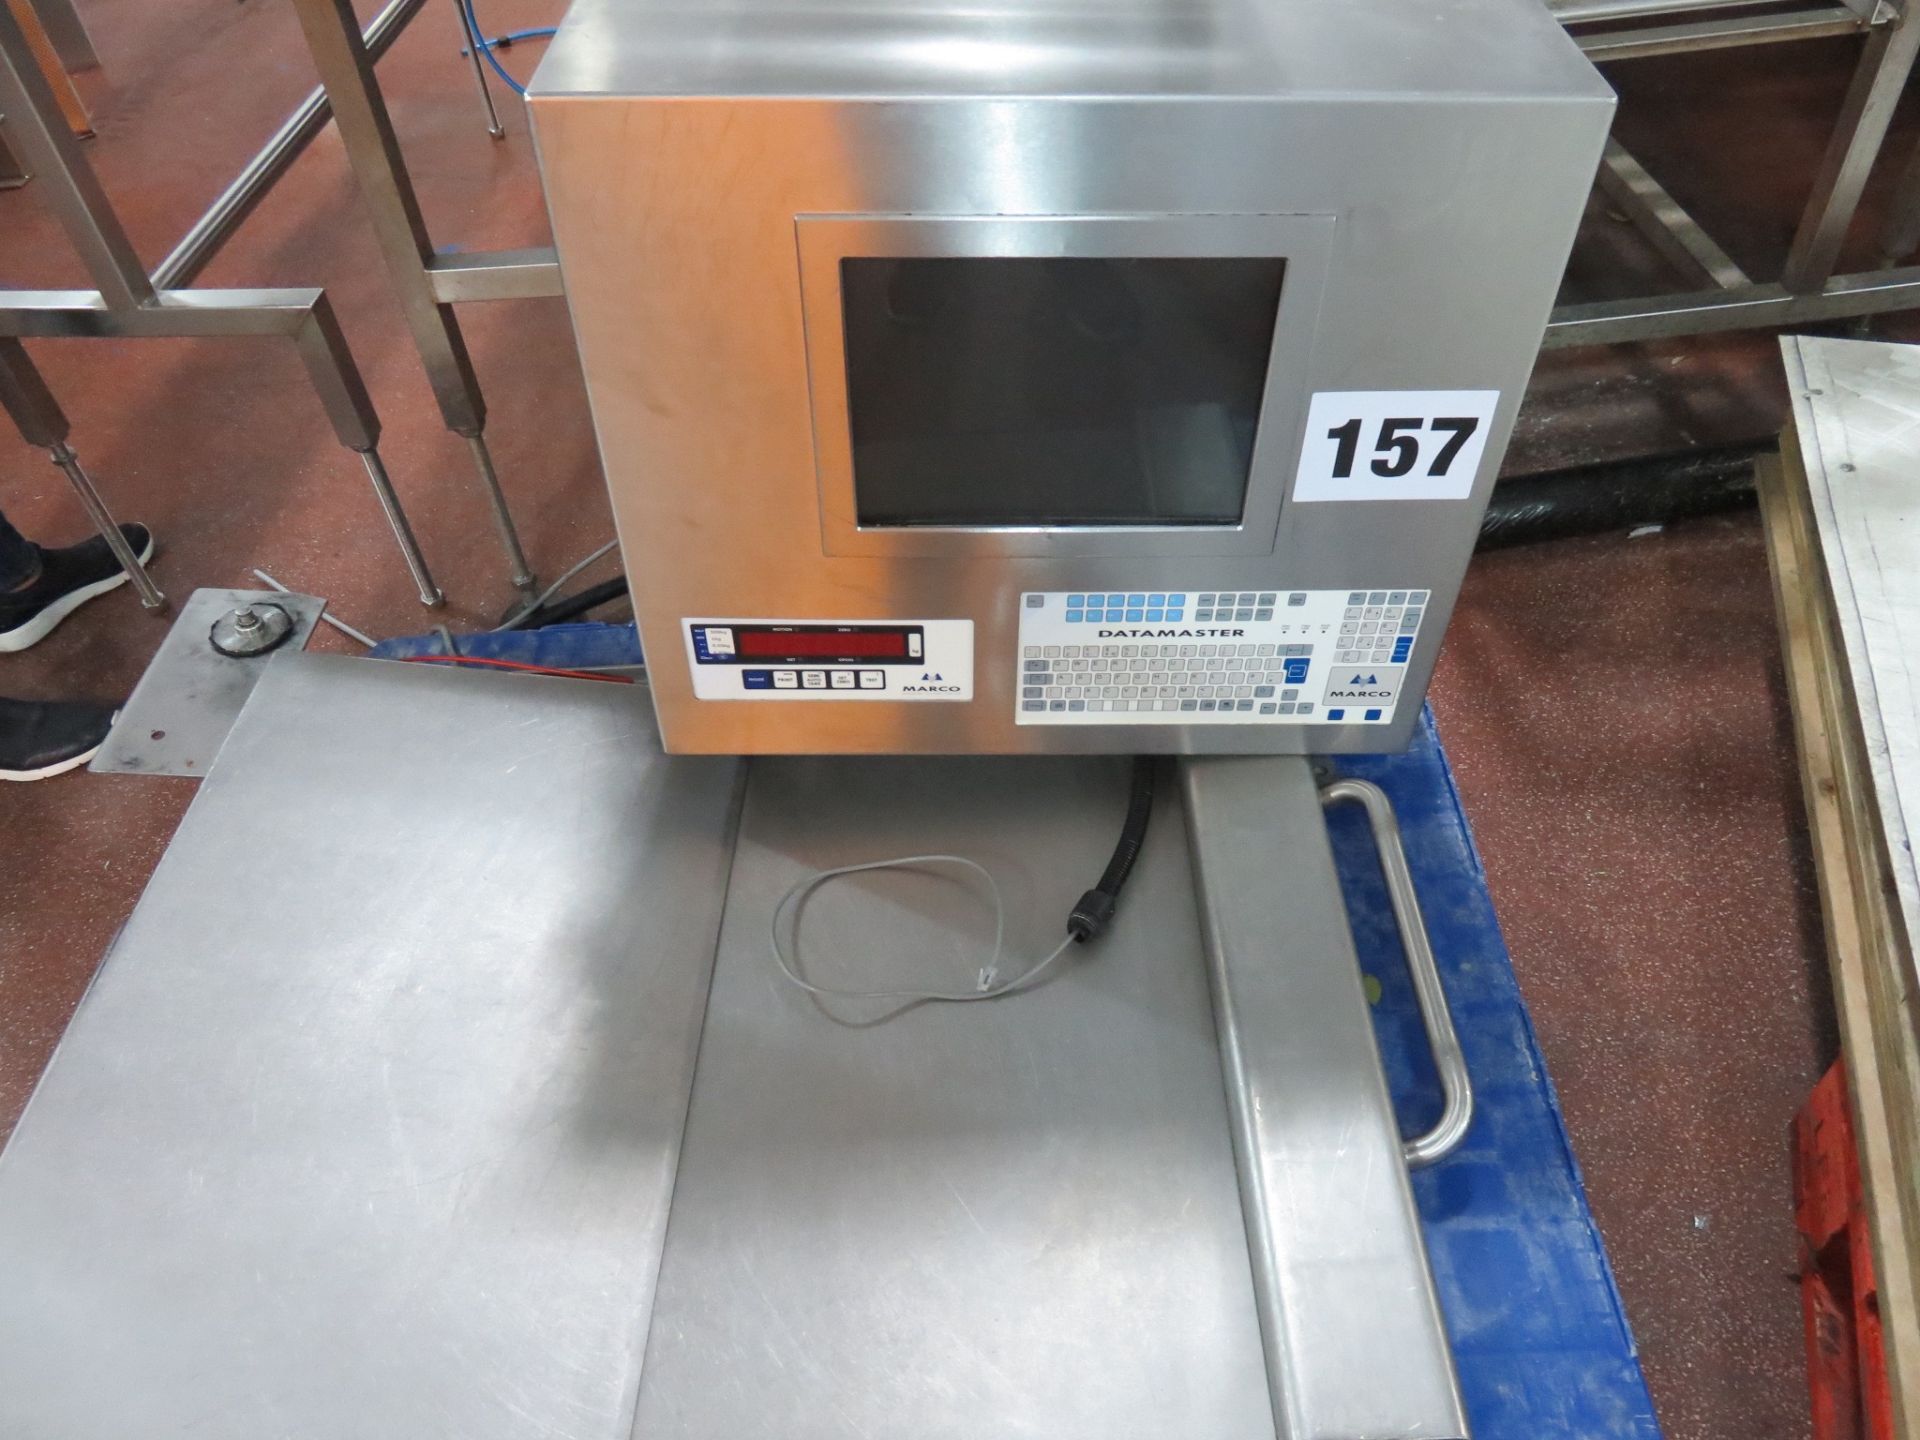 Marco Datemaster Platform Scale with ramp and wall mounted control panel. With tracking system.LO£20 - Image 2 of 2